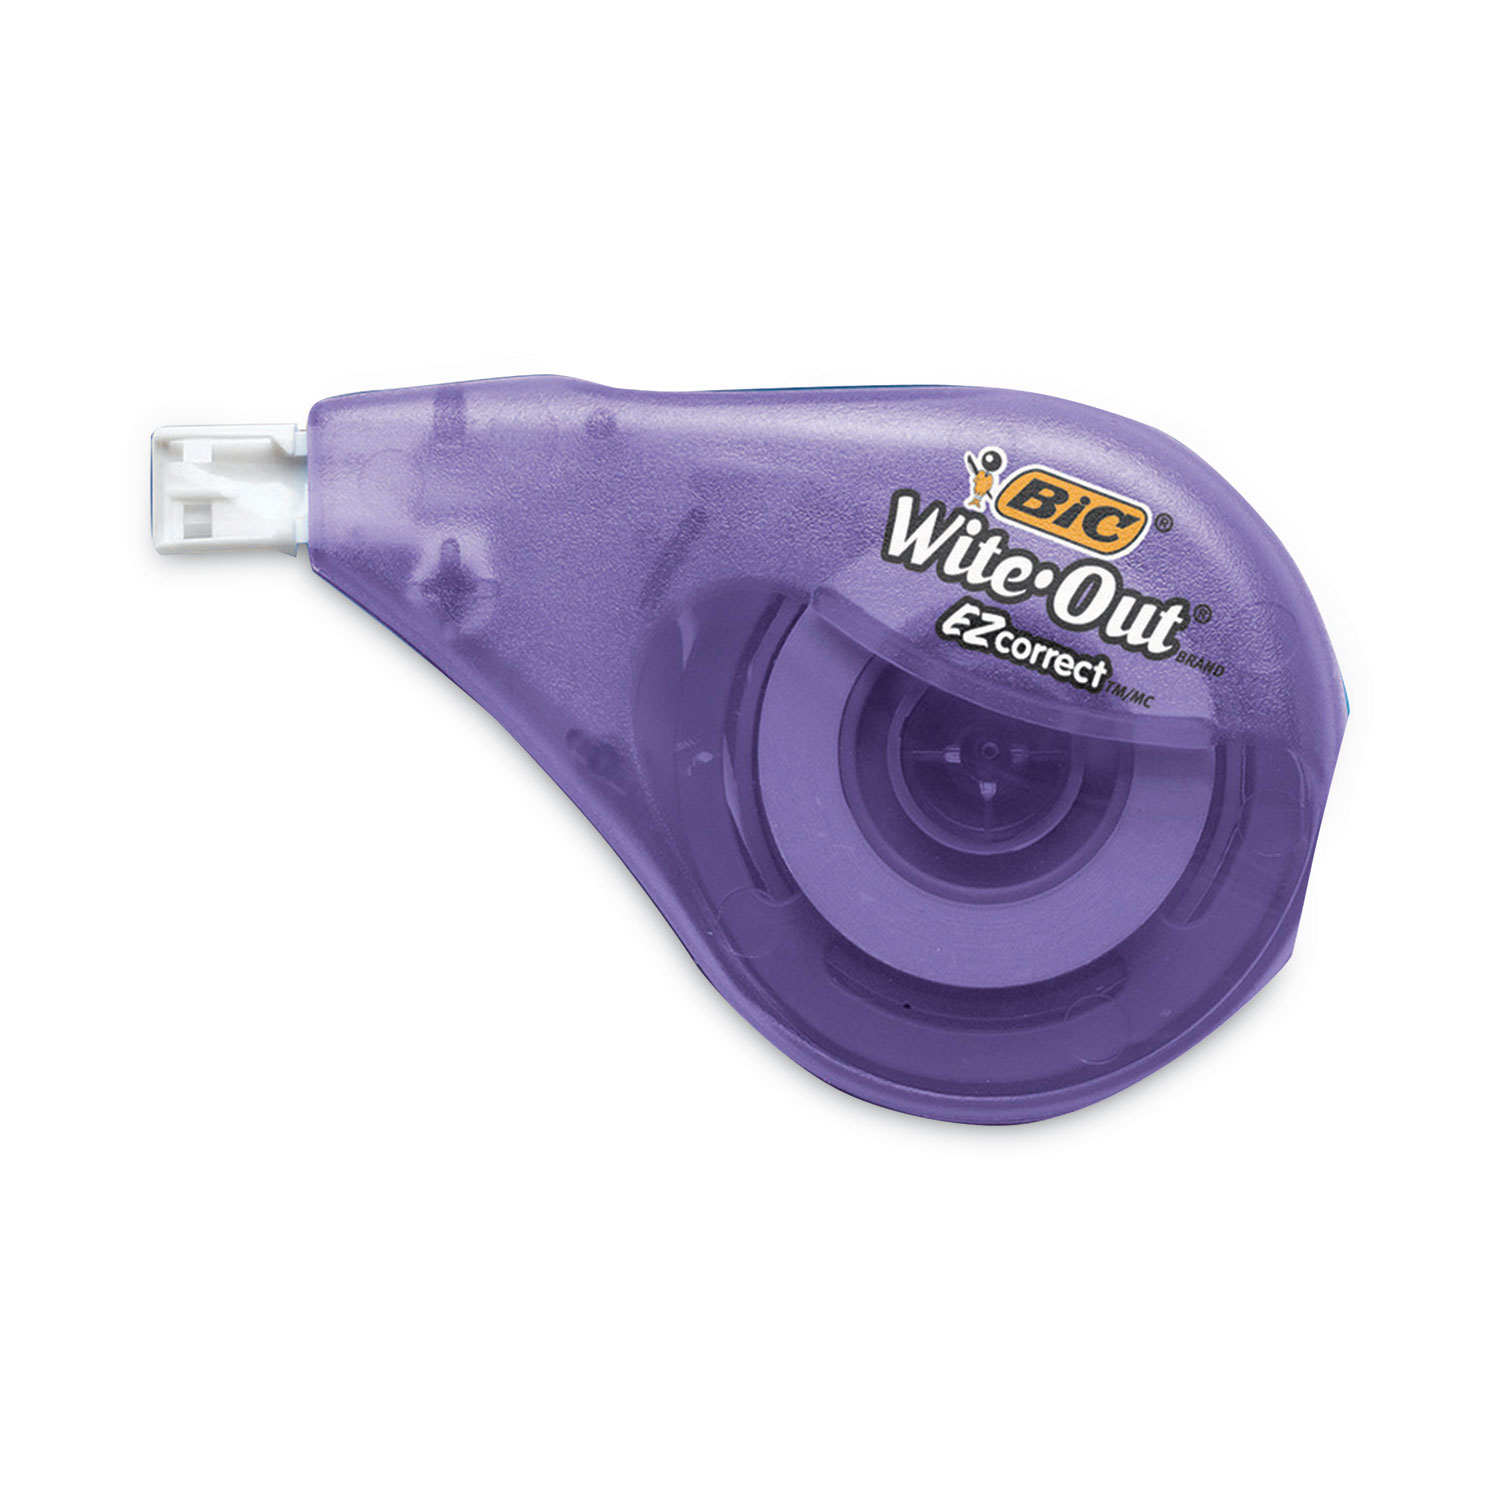 Bic Wite-out Correction Tape 2ct Orange/blue : Target